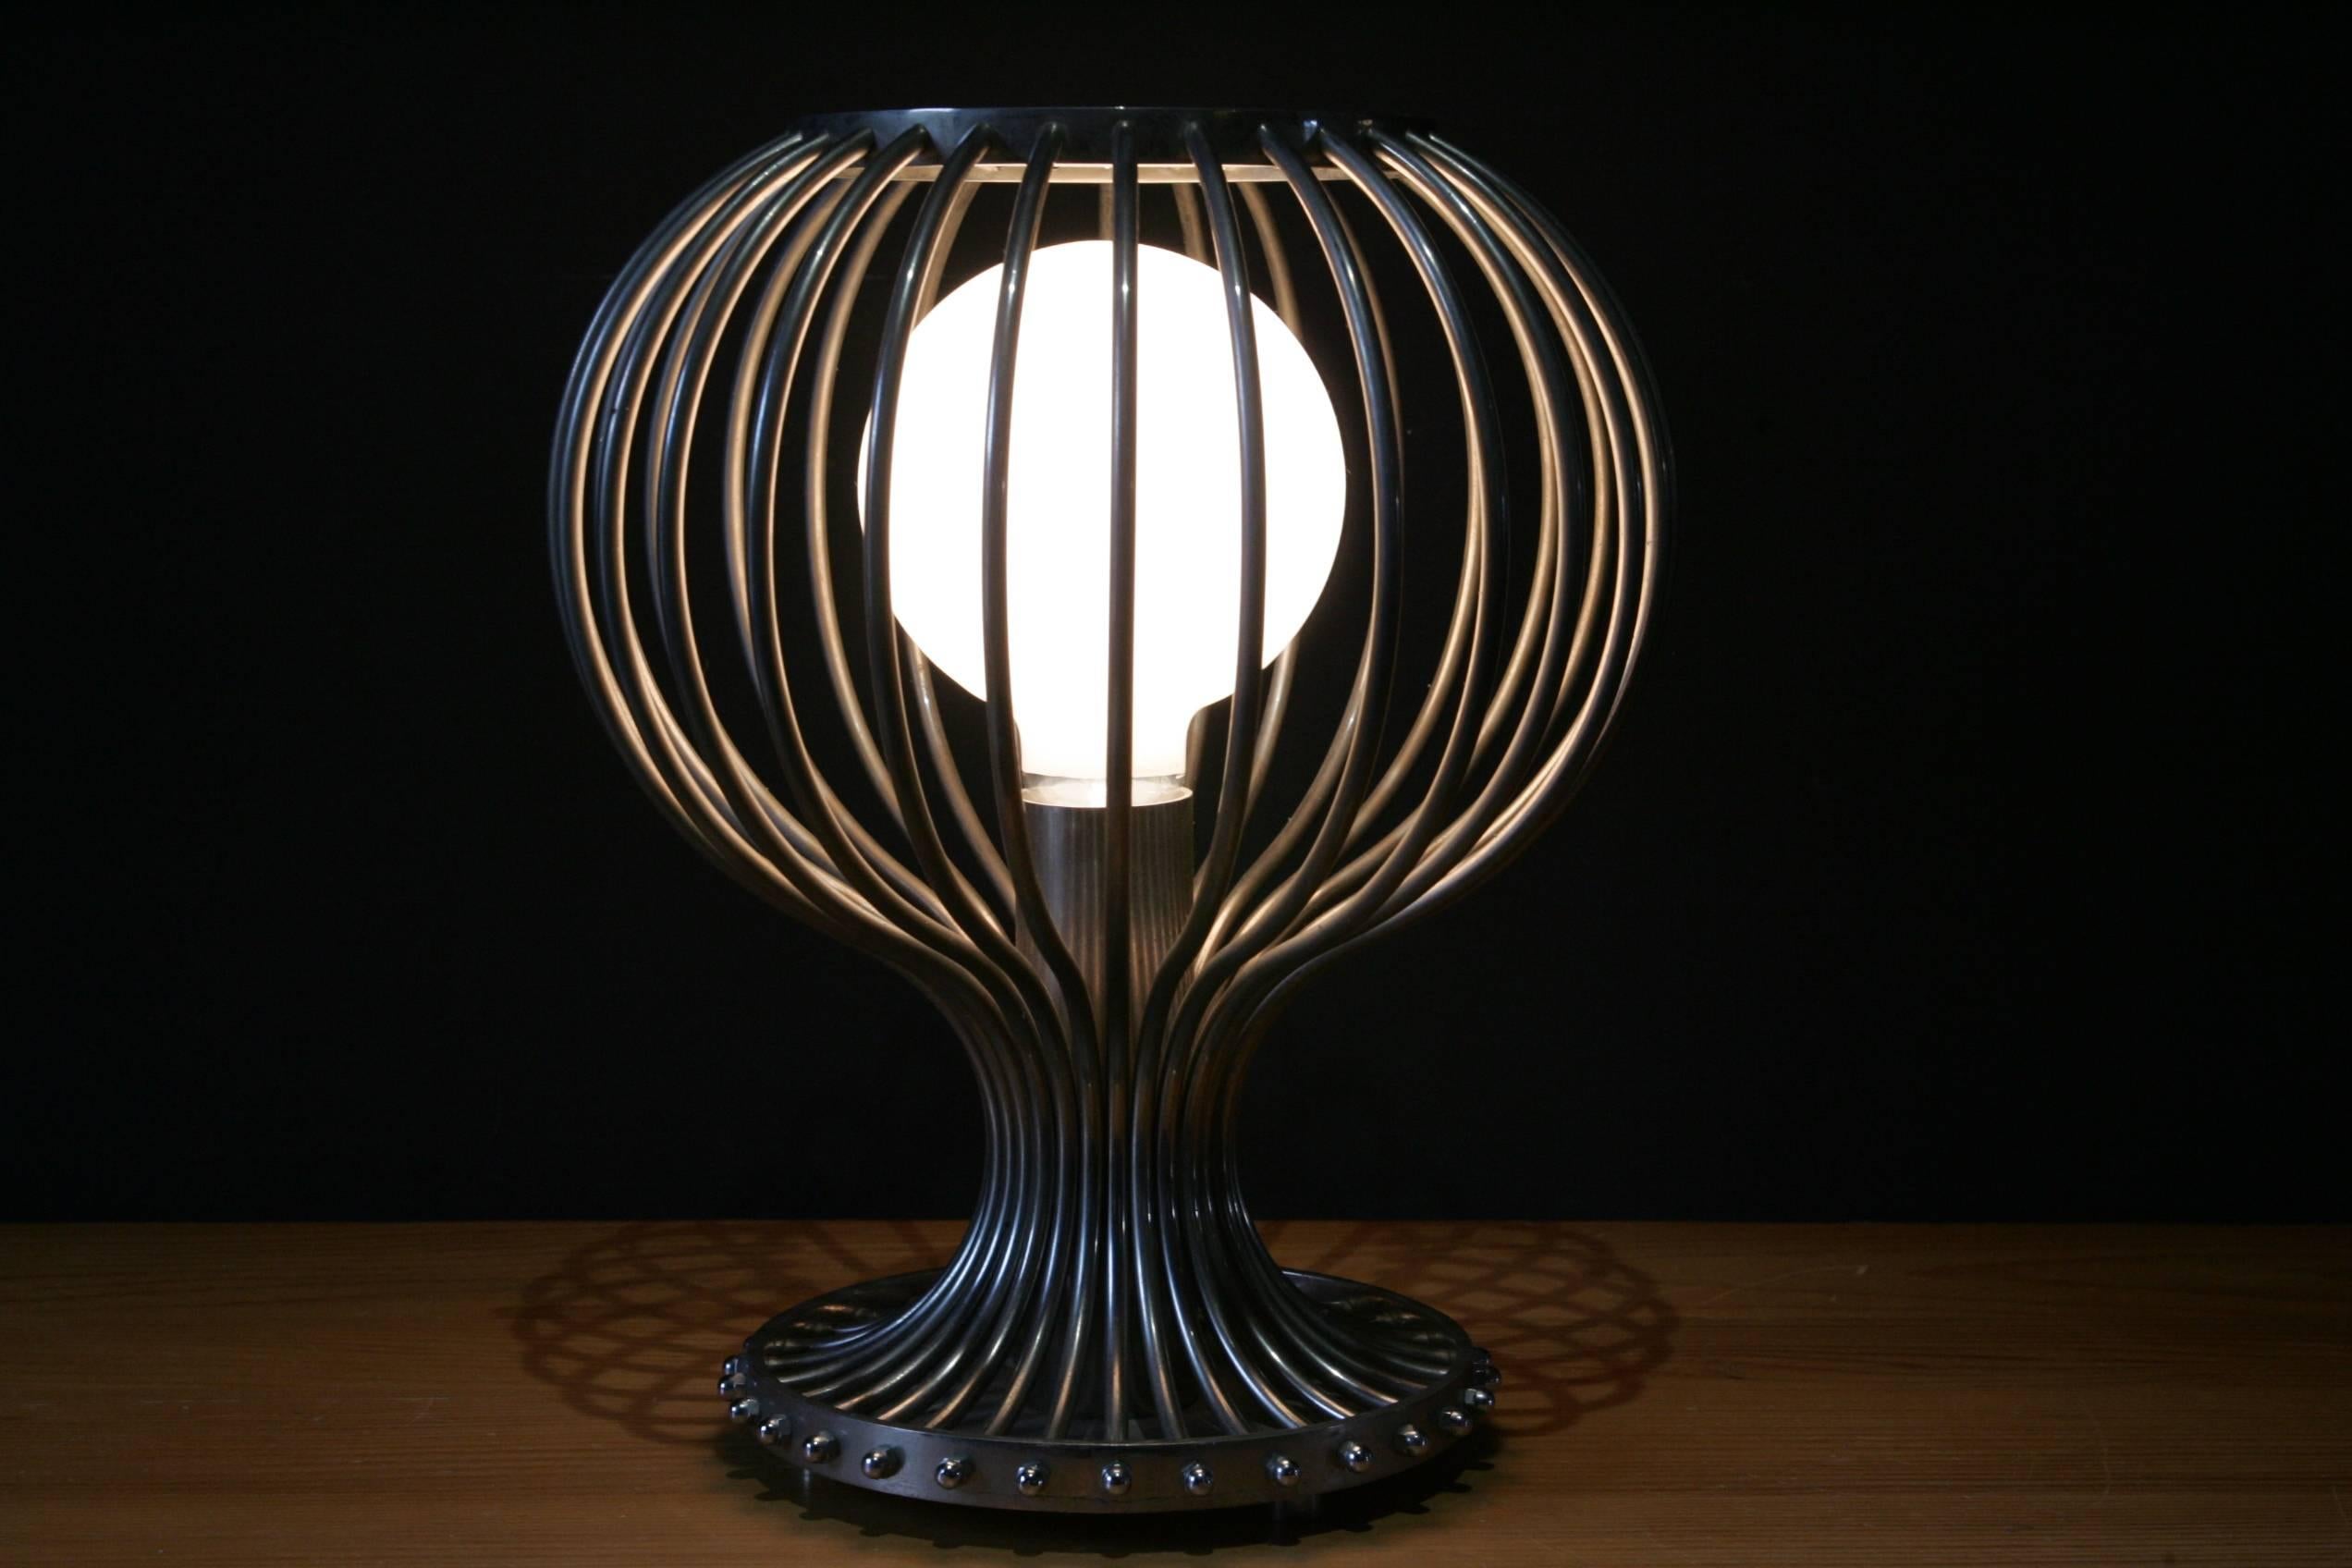 A very interesting table lamp in the manner of Nadine Charroy, Francoise Sée, Maria Pergay, Crespi or....
The quality is high and perfect.